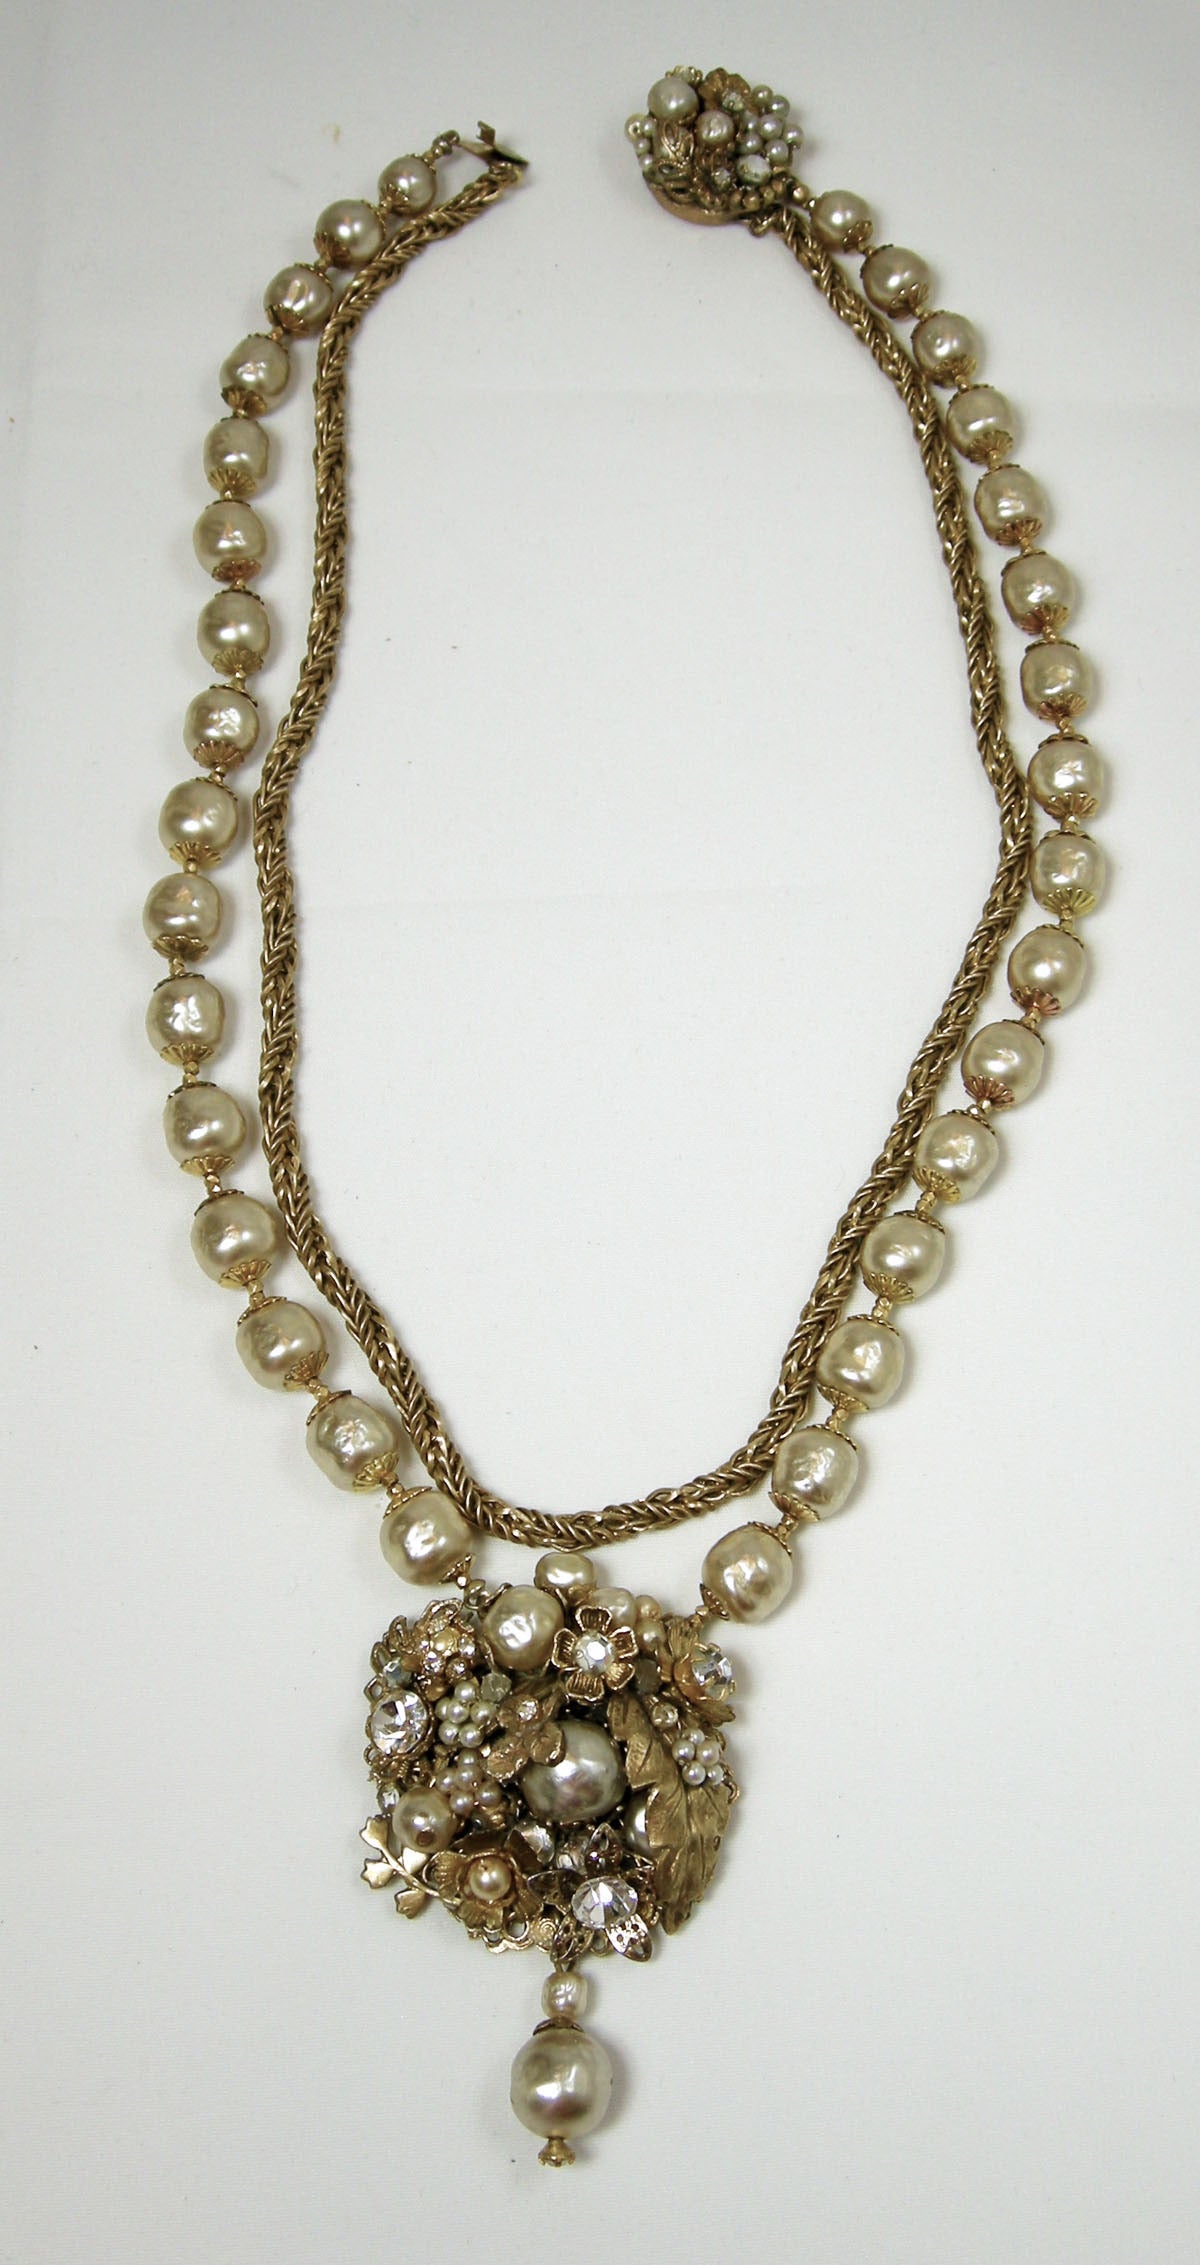 This is a vintage1960s two-strand Miriam Haskell necklace has a hanging centerpiece with pearl drop at the bottom. The inner strand has Haskell’s known chain and the second strand is a Haskell’s faux pearls strand with tiny gold nuggets between the